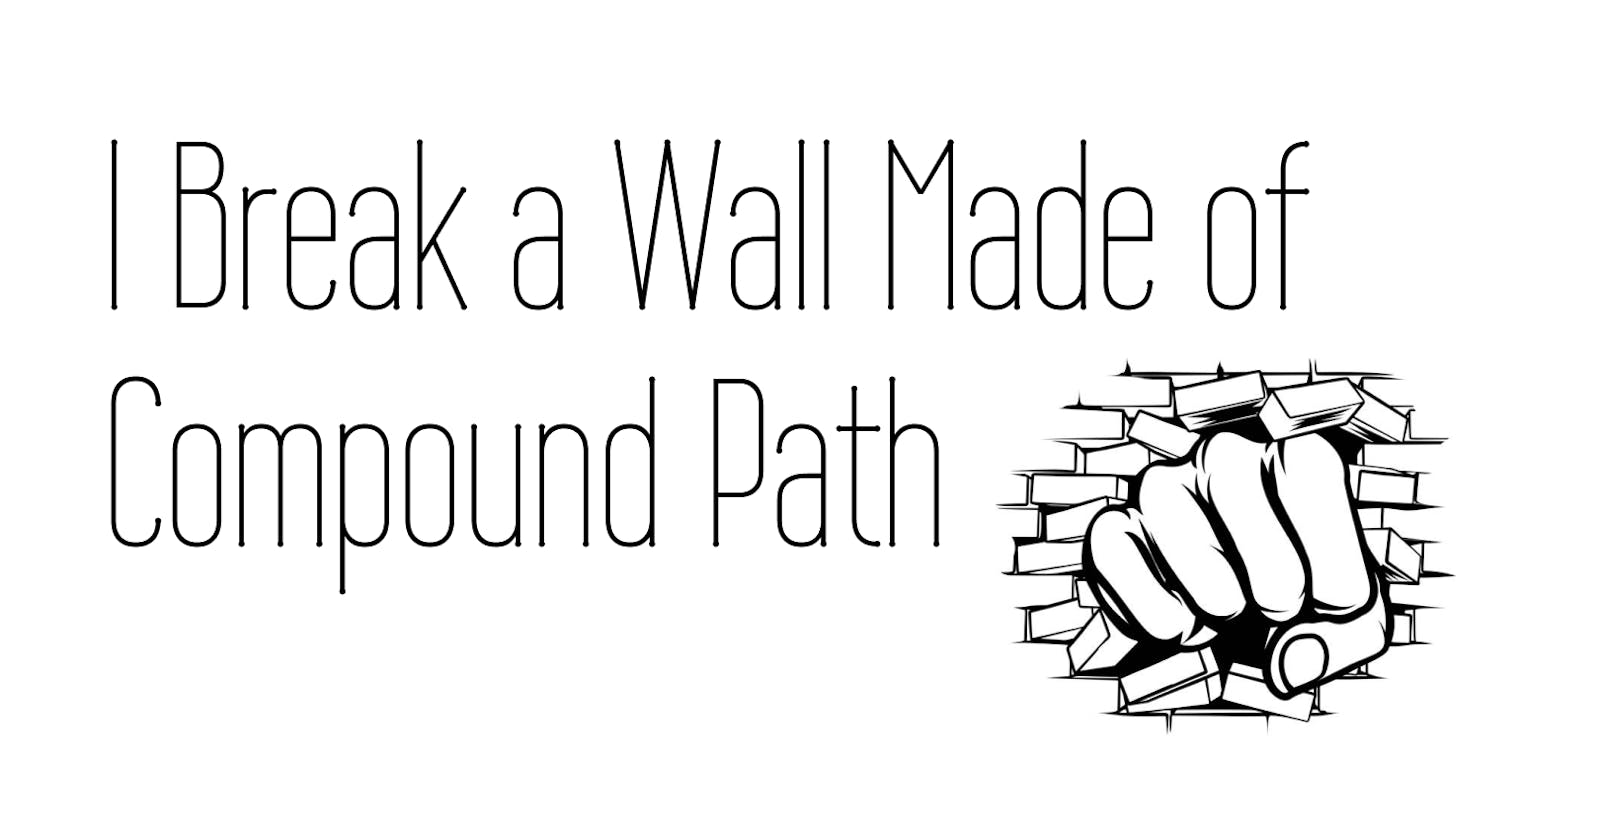 I Break a Wall Made of Compound Path